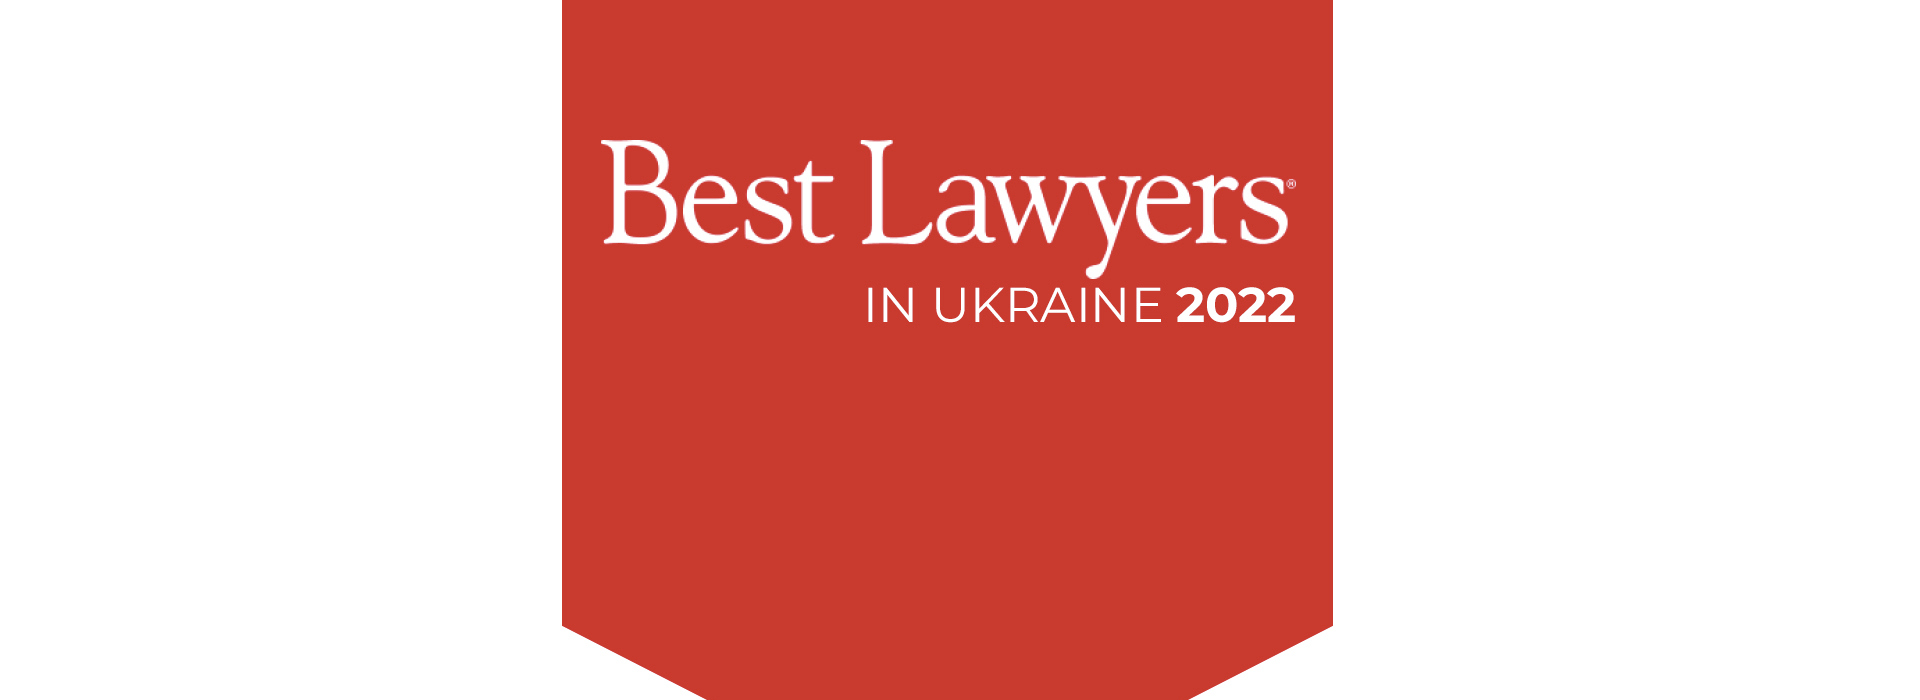 GOLAW Lawyers Have Been Listed Among the Top Professionals in Ukraine According to the International Research Program Best Lawyers and Included to the 12th Edition of The Best Lawyers in Ukraine 2022